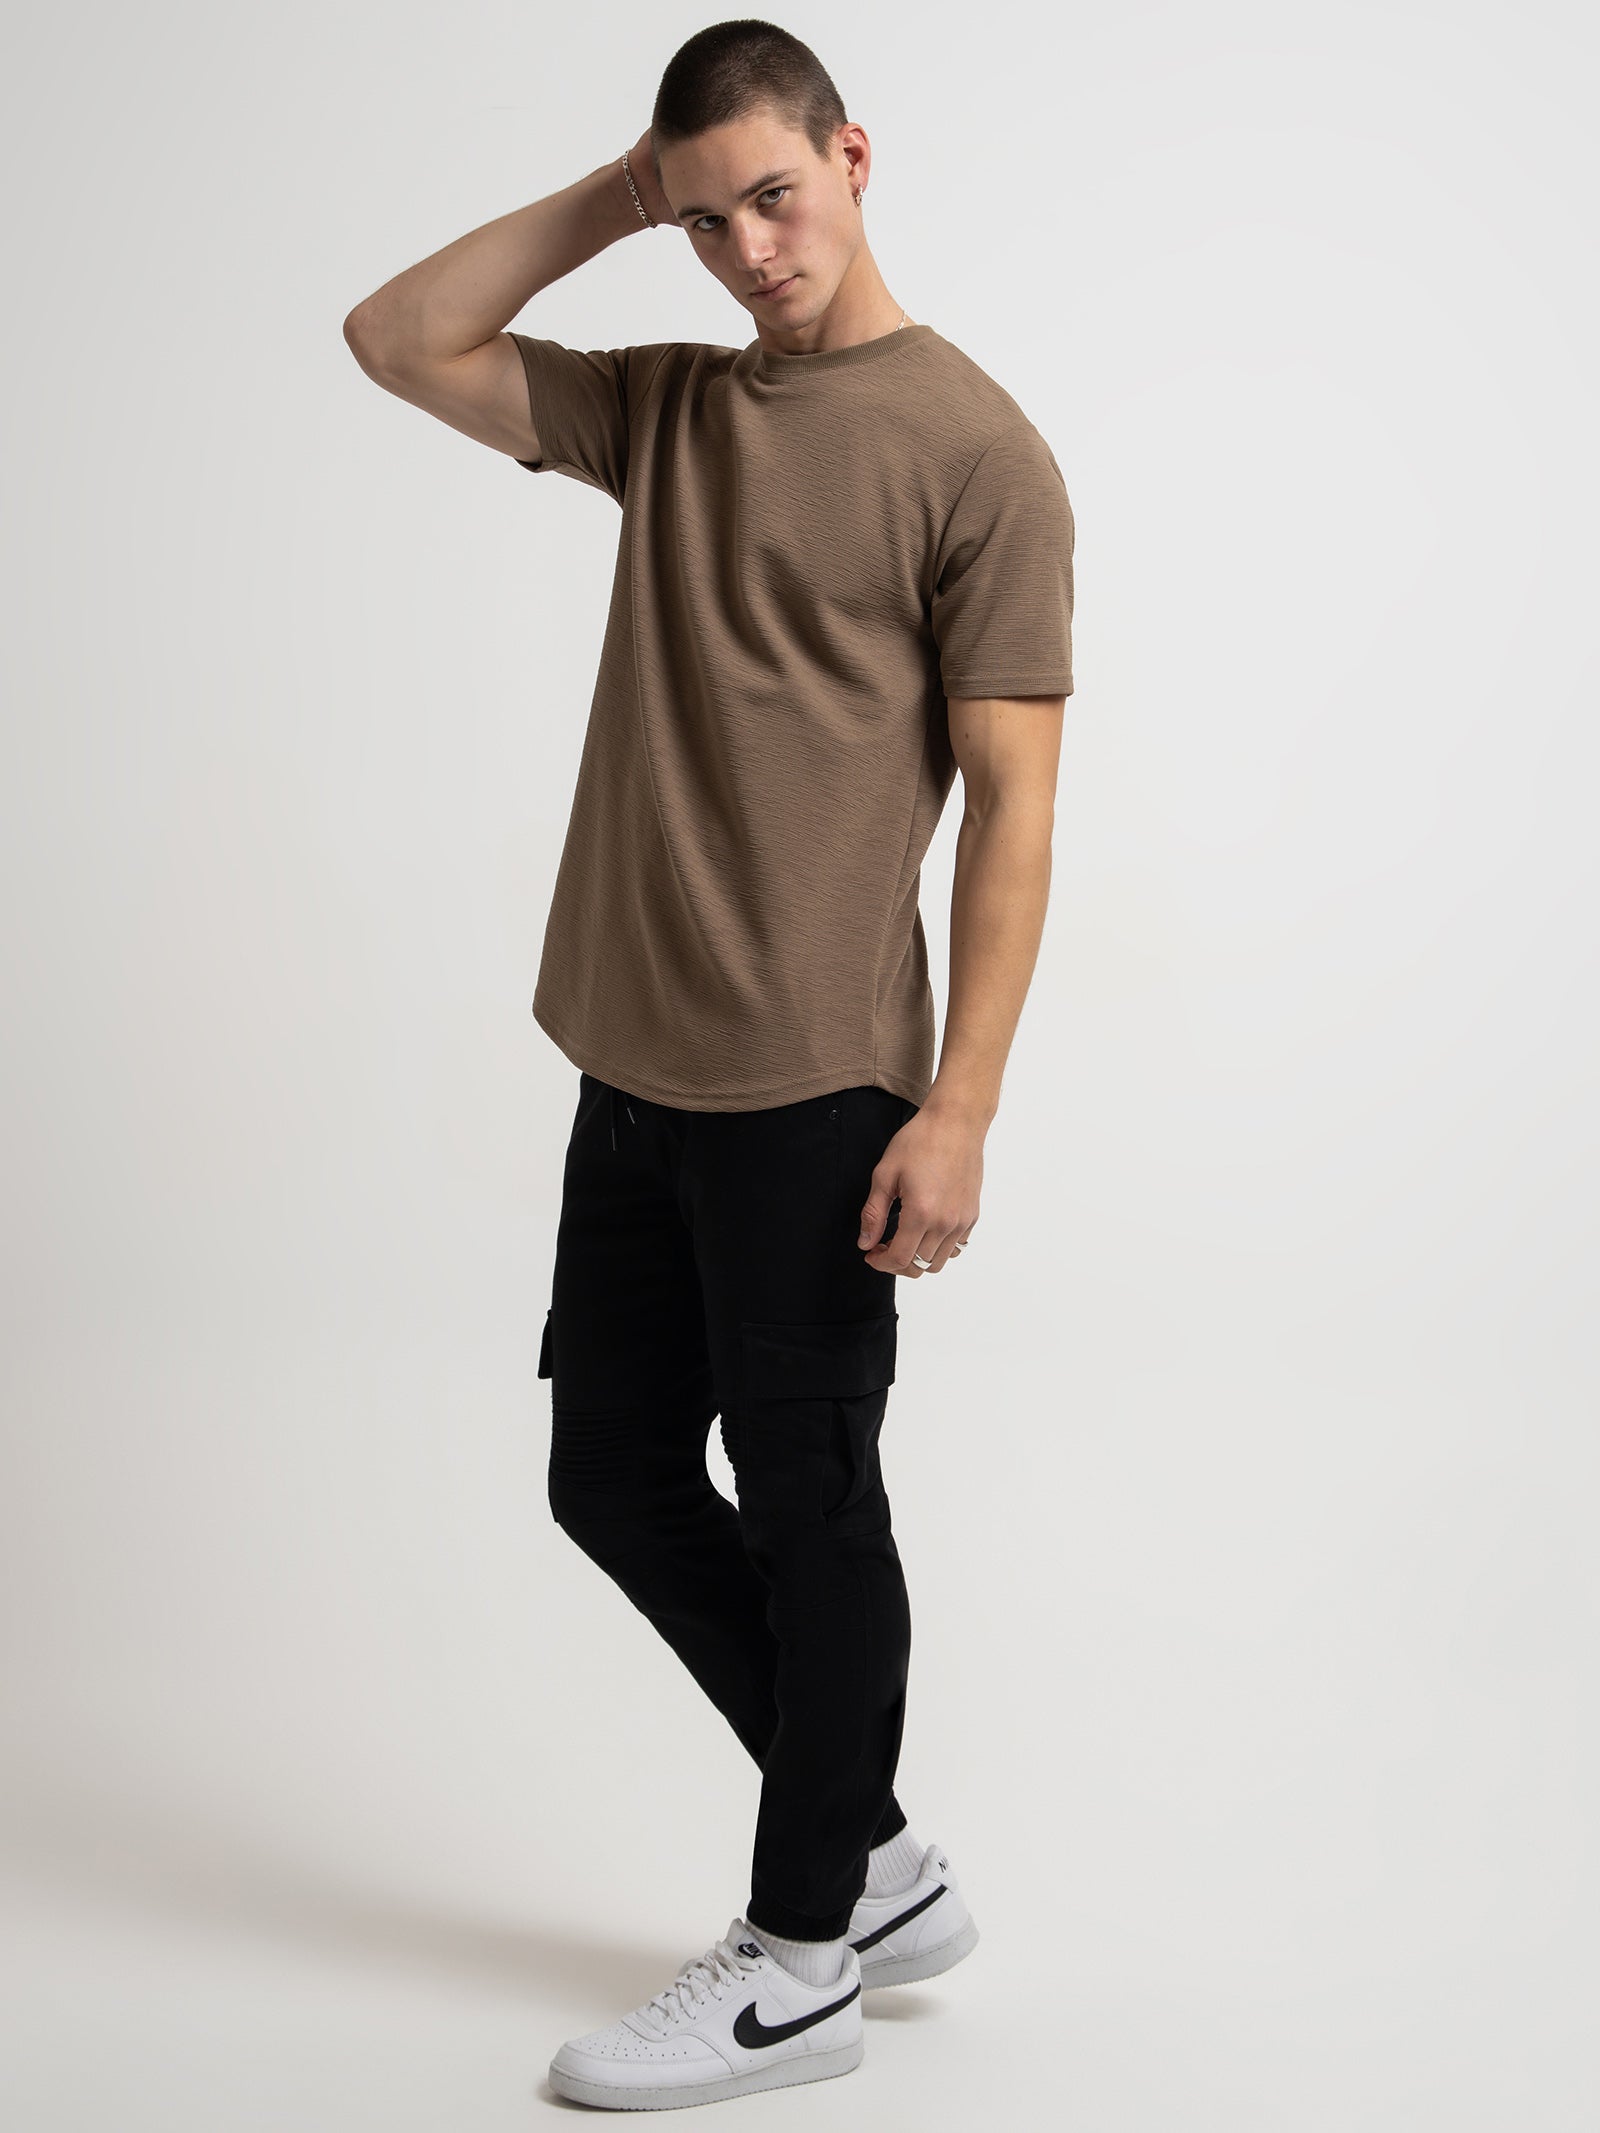 Lincoln T-Shirt in Tan